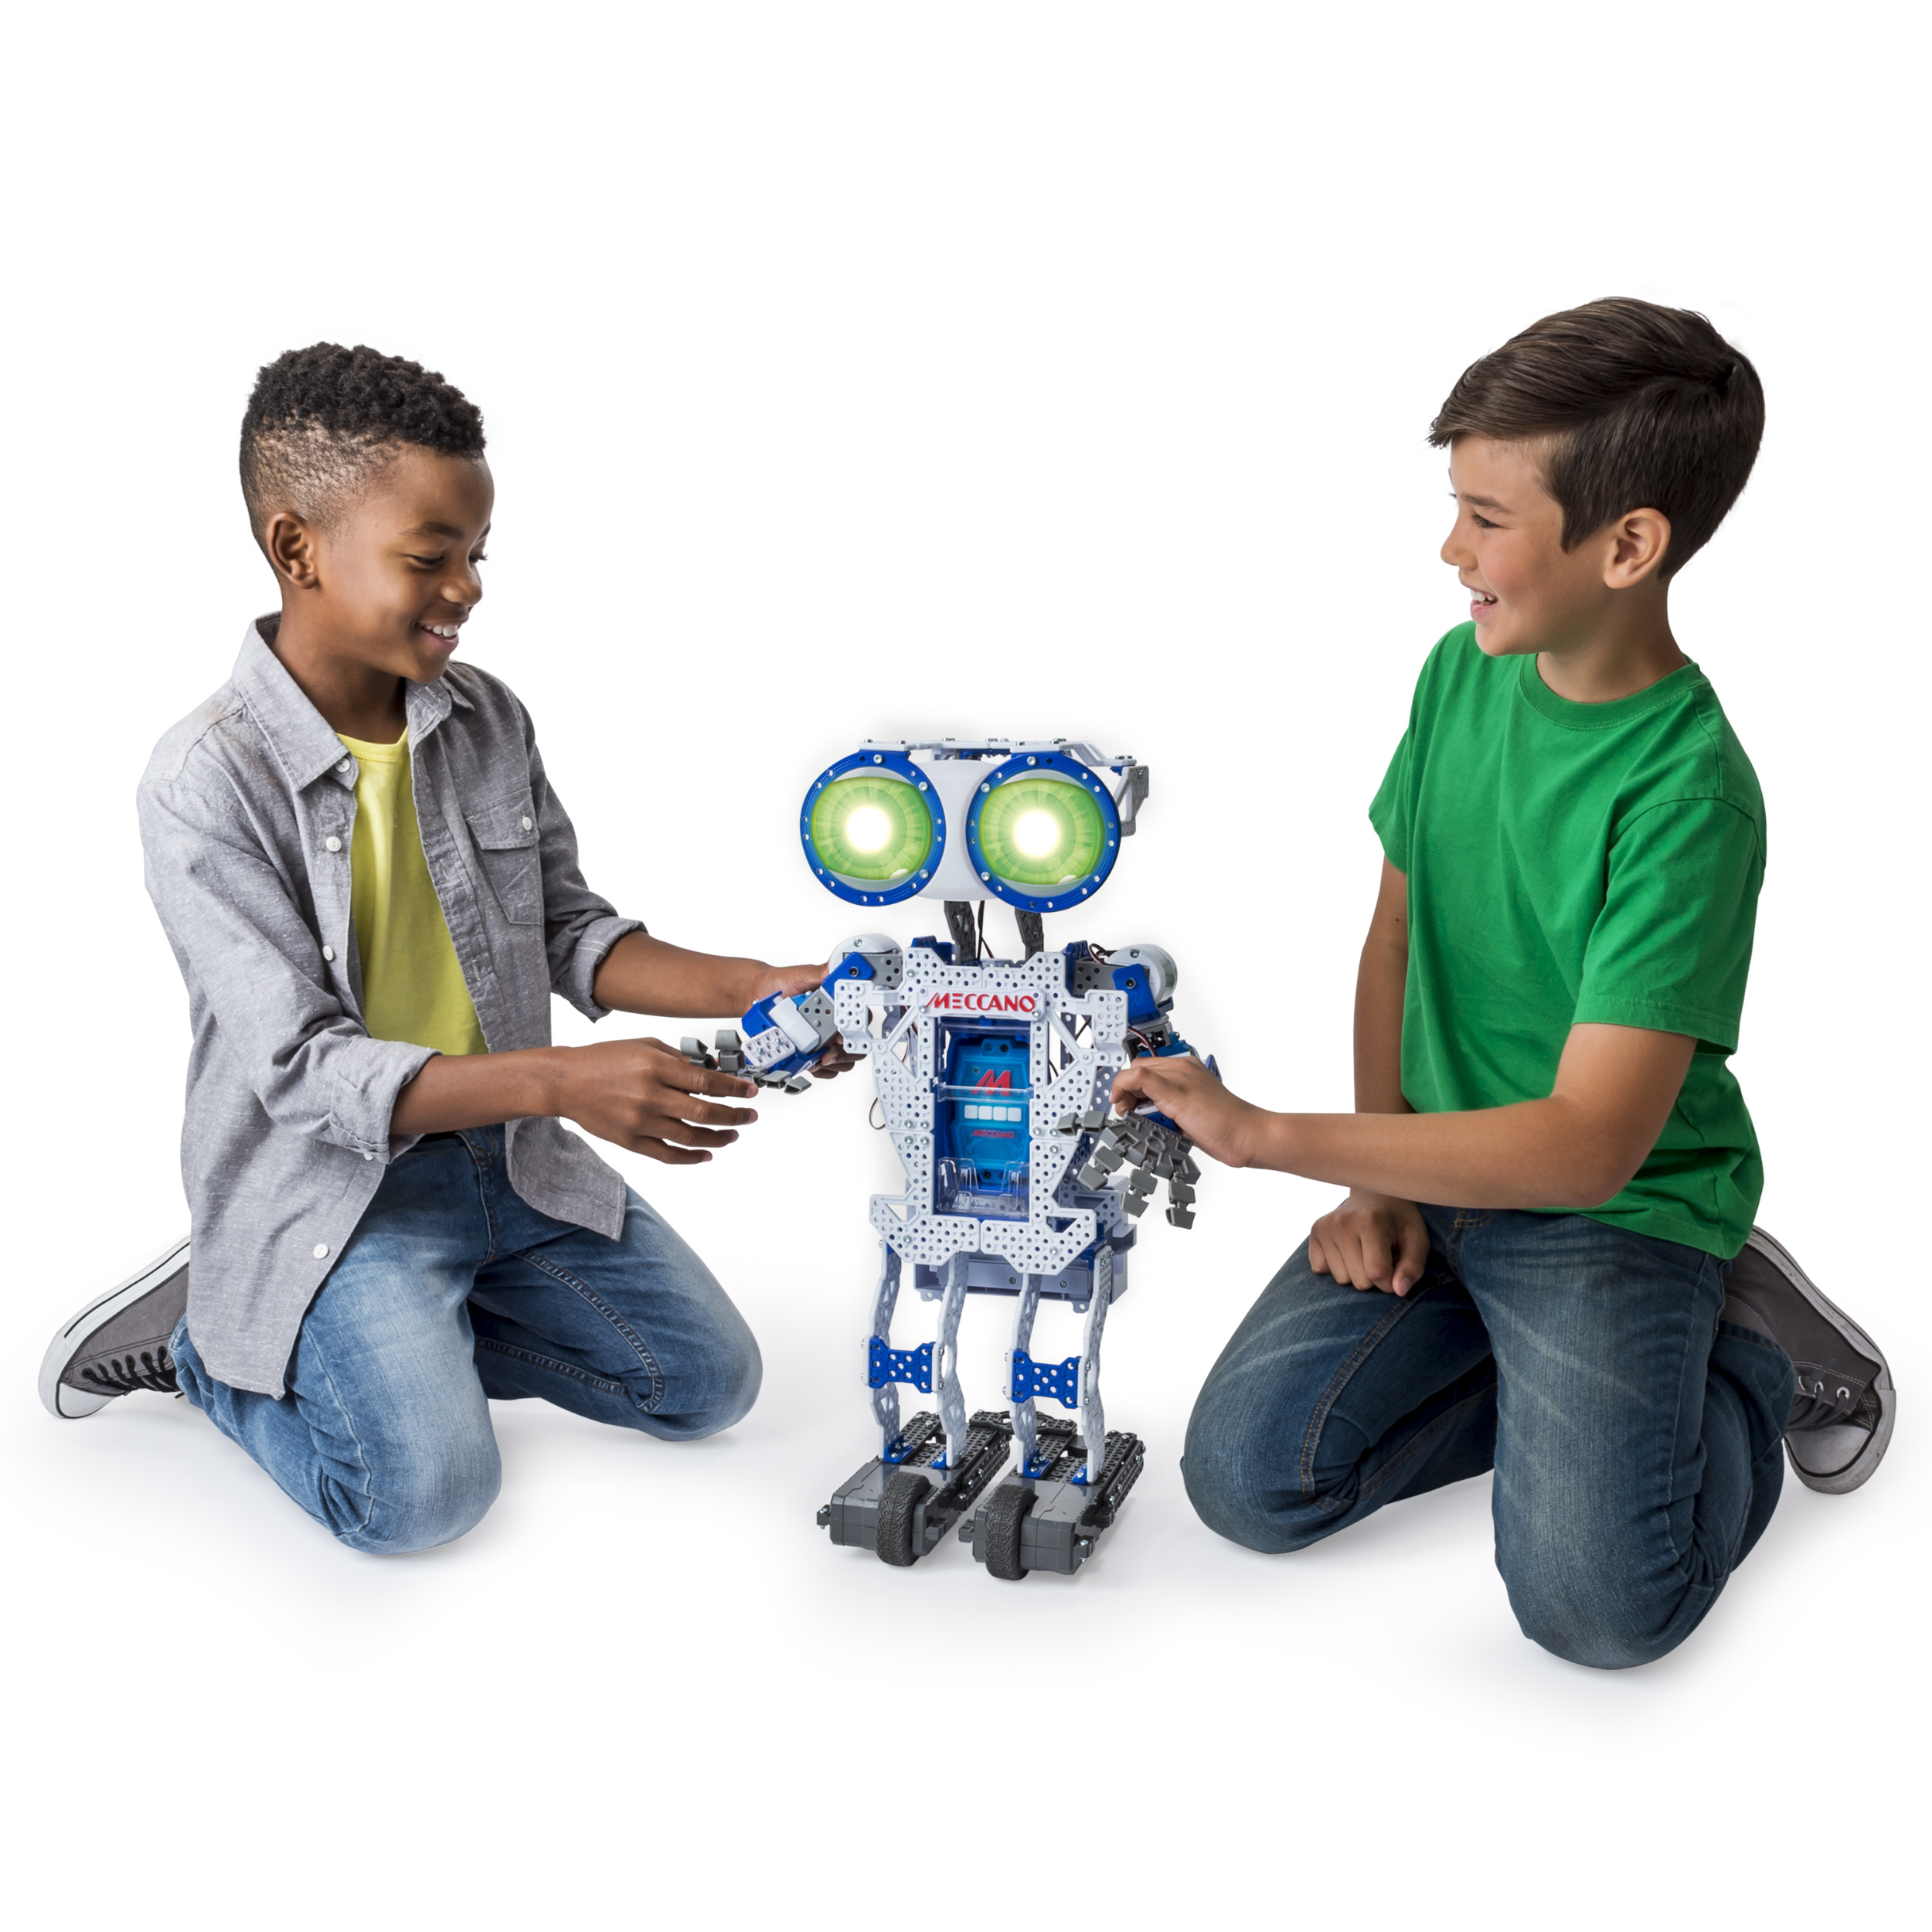 Meccano by Erector, Meccanoid 2.0 Robot-Building Kit STEM Engineering Education Toy - image 4 of 8